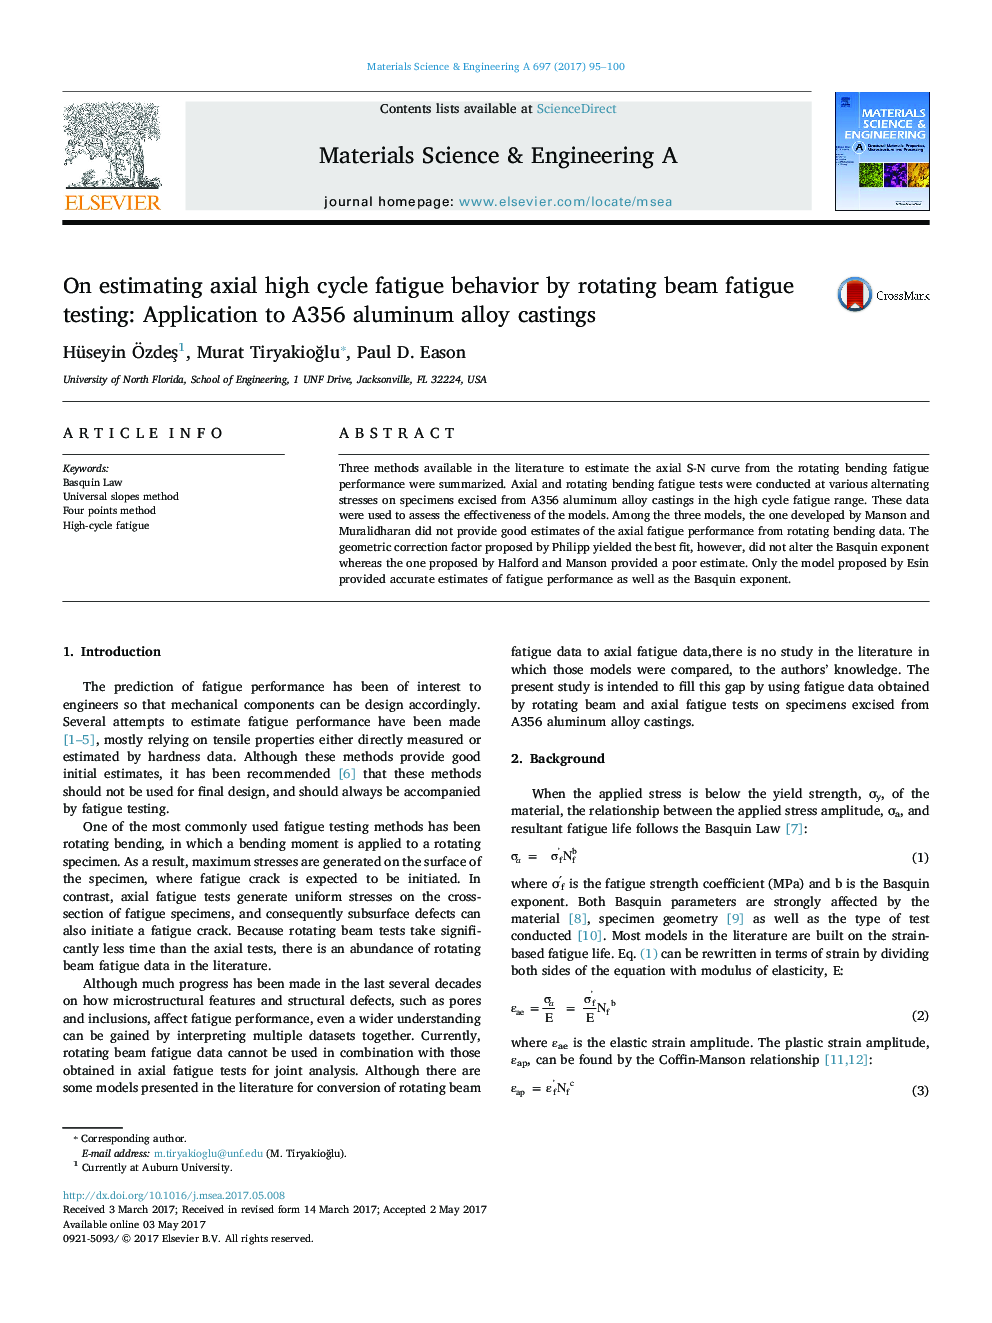 On estimating axial high cycle fatigue behavior by rotating beam fatigue testing: Application to A356 aluminum alloy castings